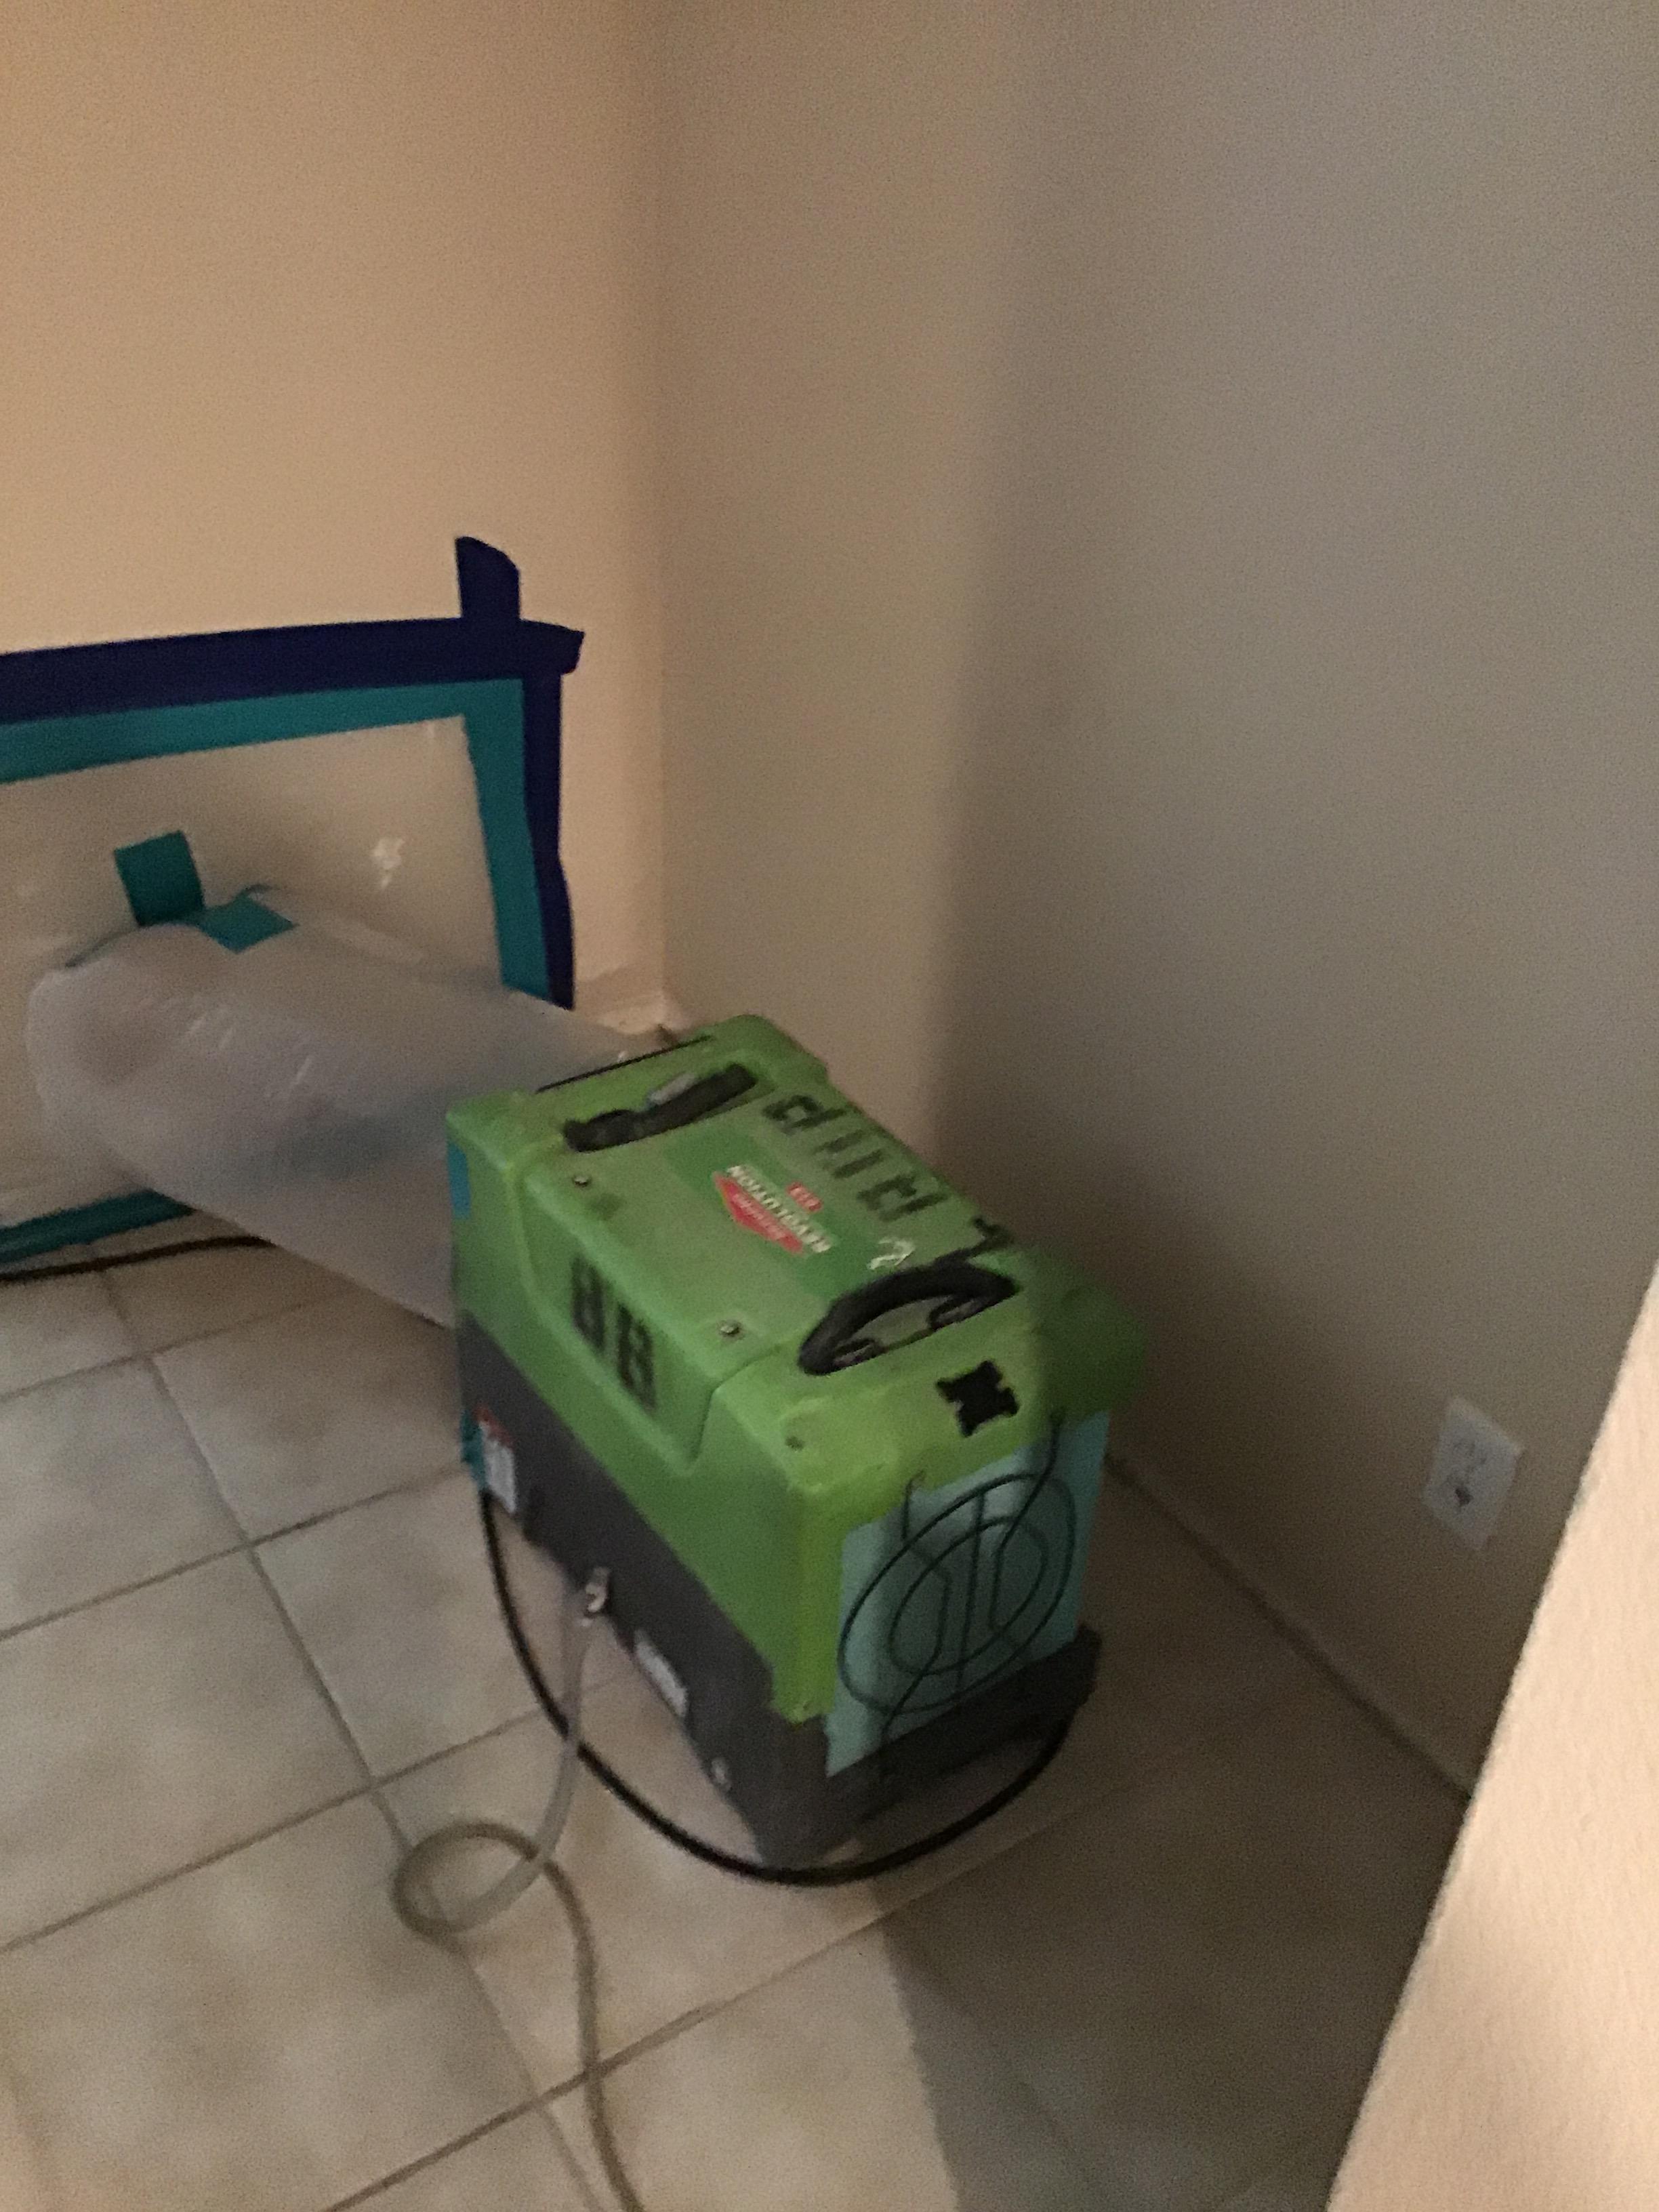 When mold is found inside your home, using an air scrubber will help remove the mold particles from the air.